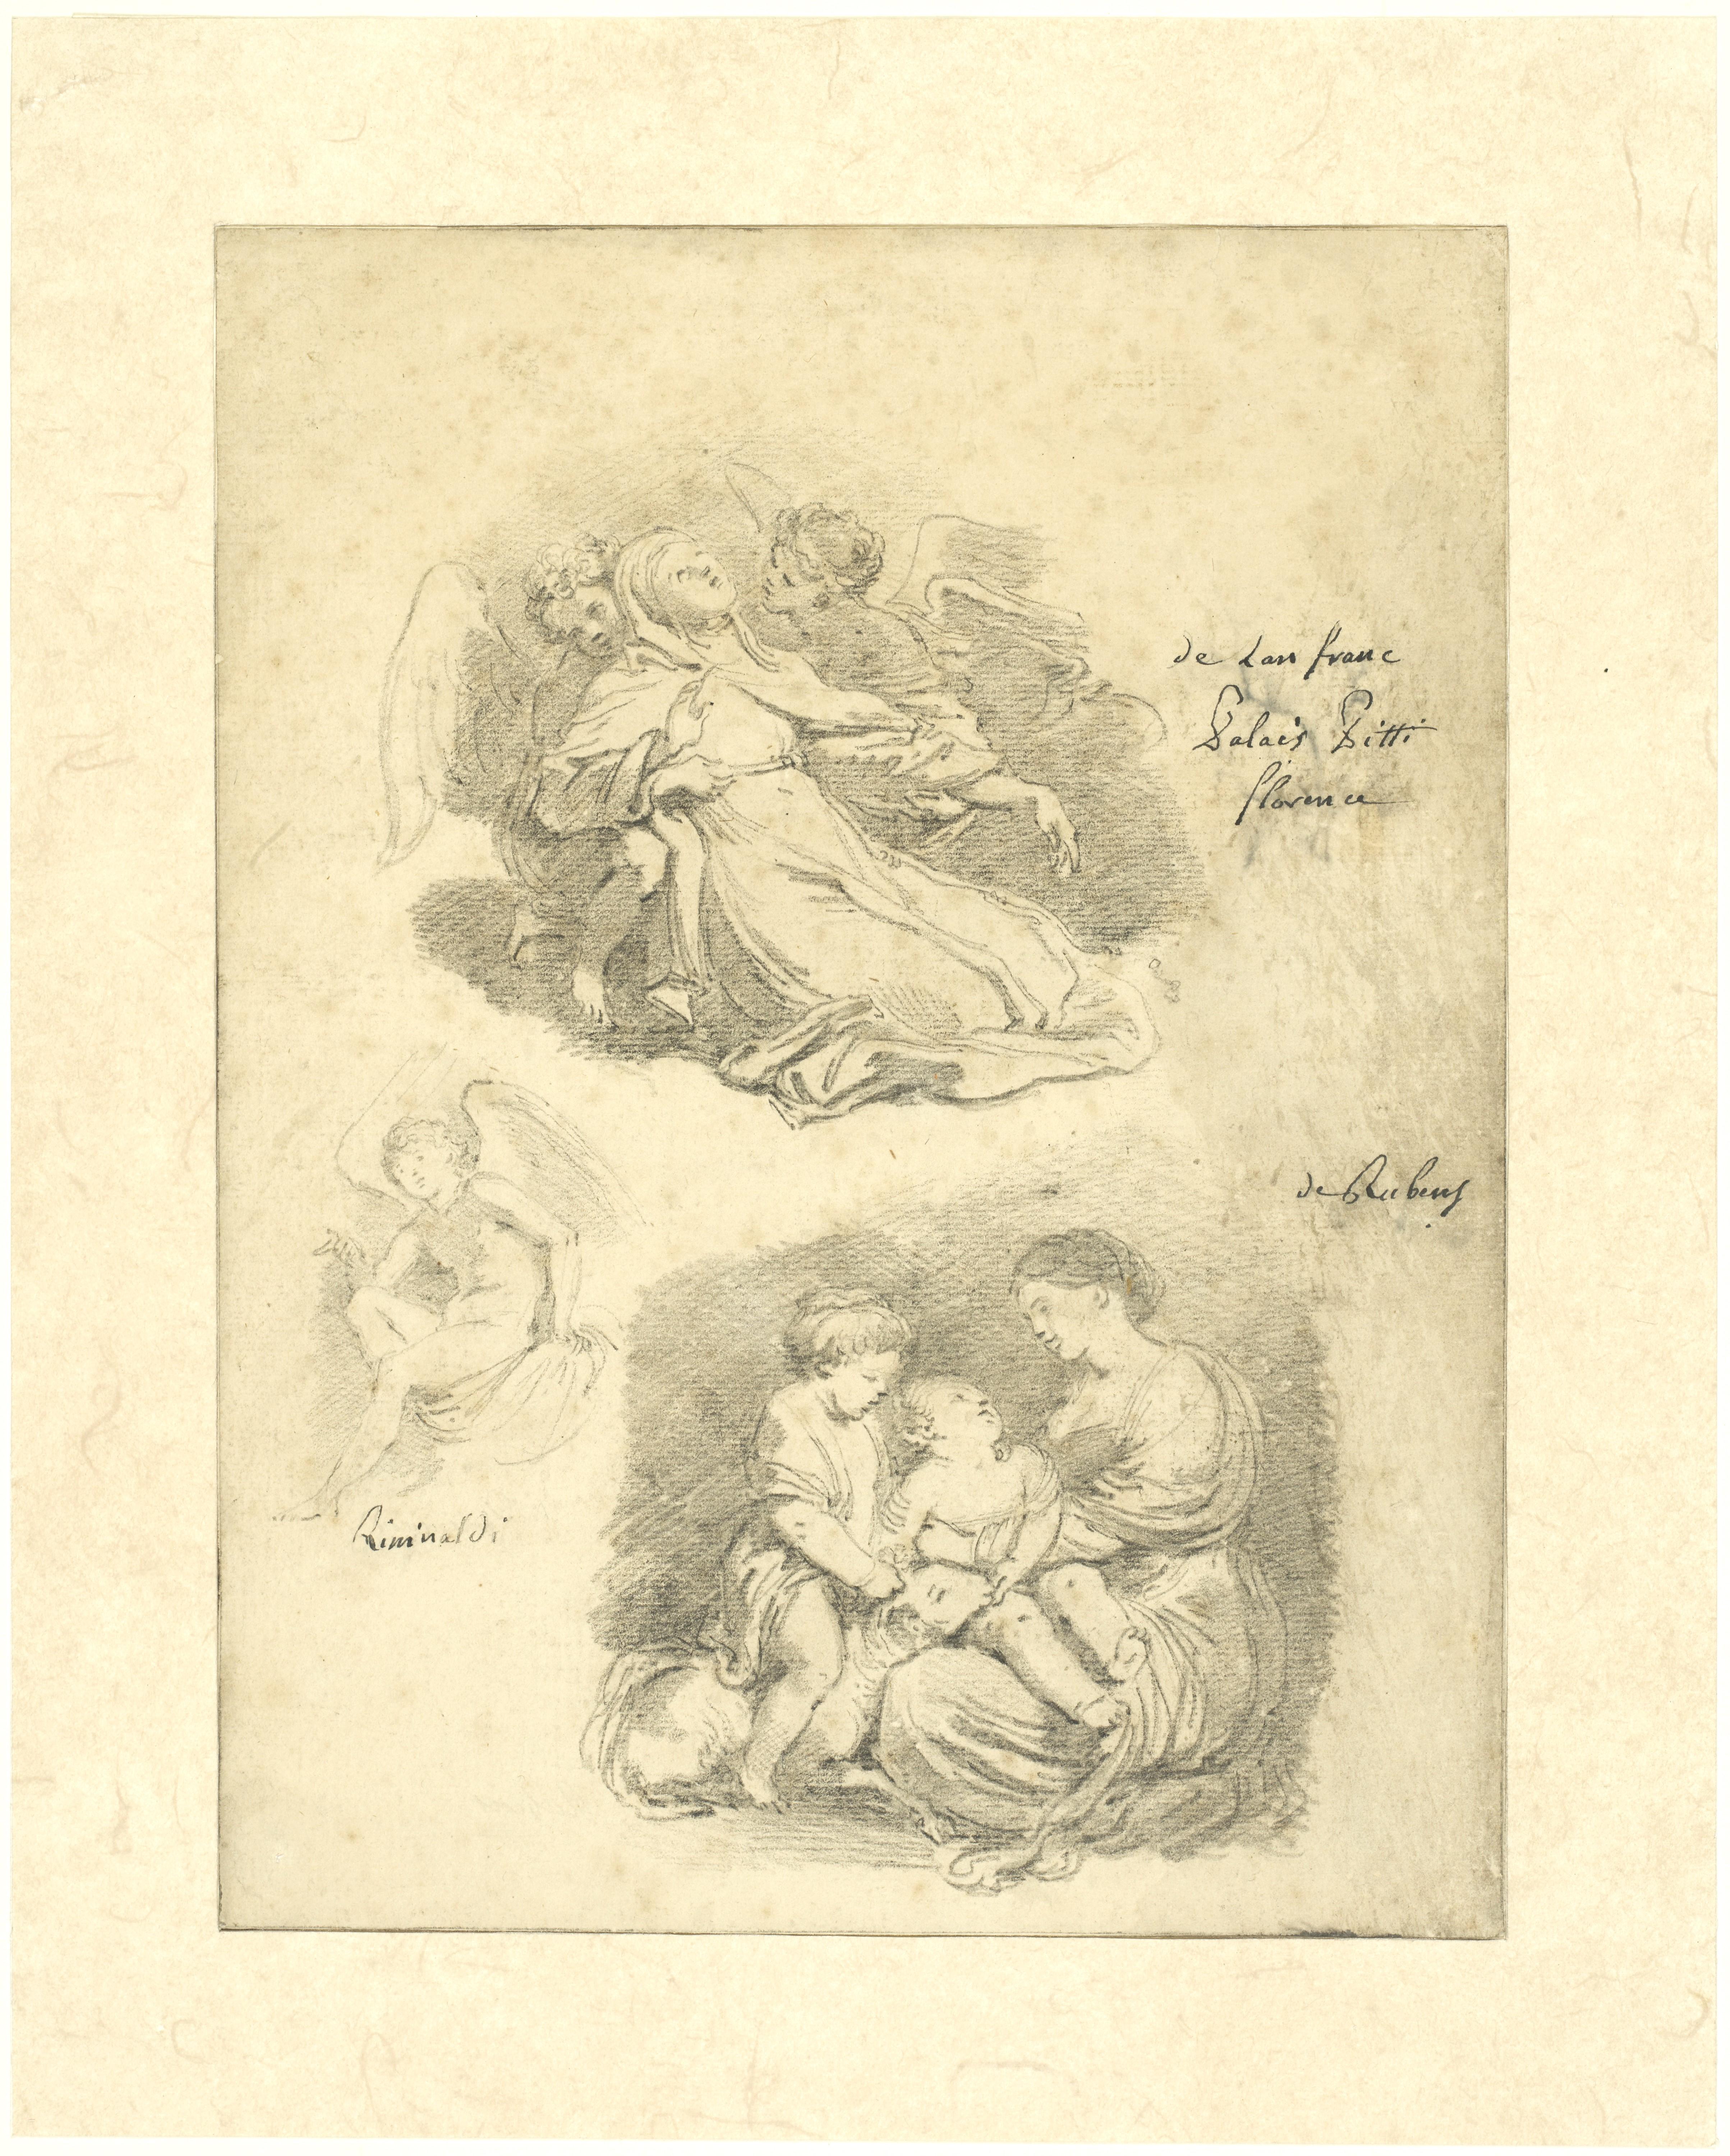 This brilliant study sheet, of which we present here a counterproof, is a souvenir of Fragonard's return journey from Italy. Between April and September 1761, he accompanied the abbot of Saint-Non on his way back to France. Three studies after the